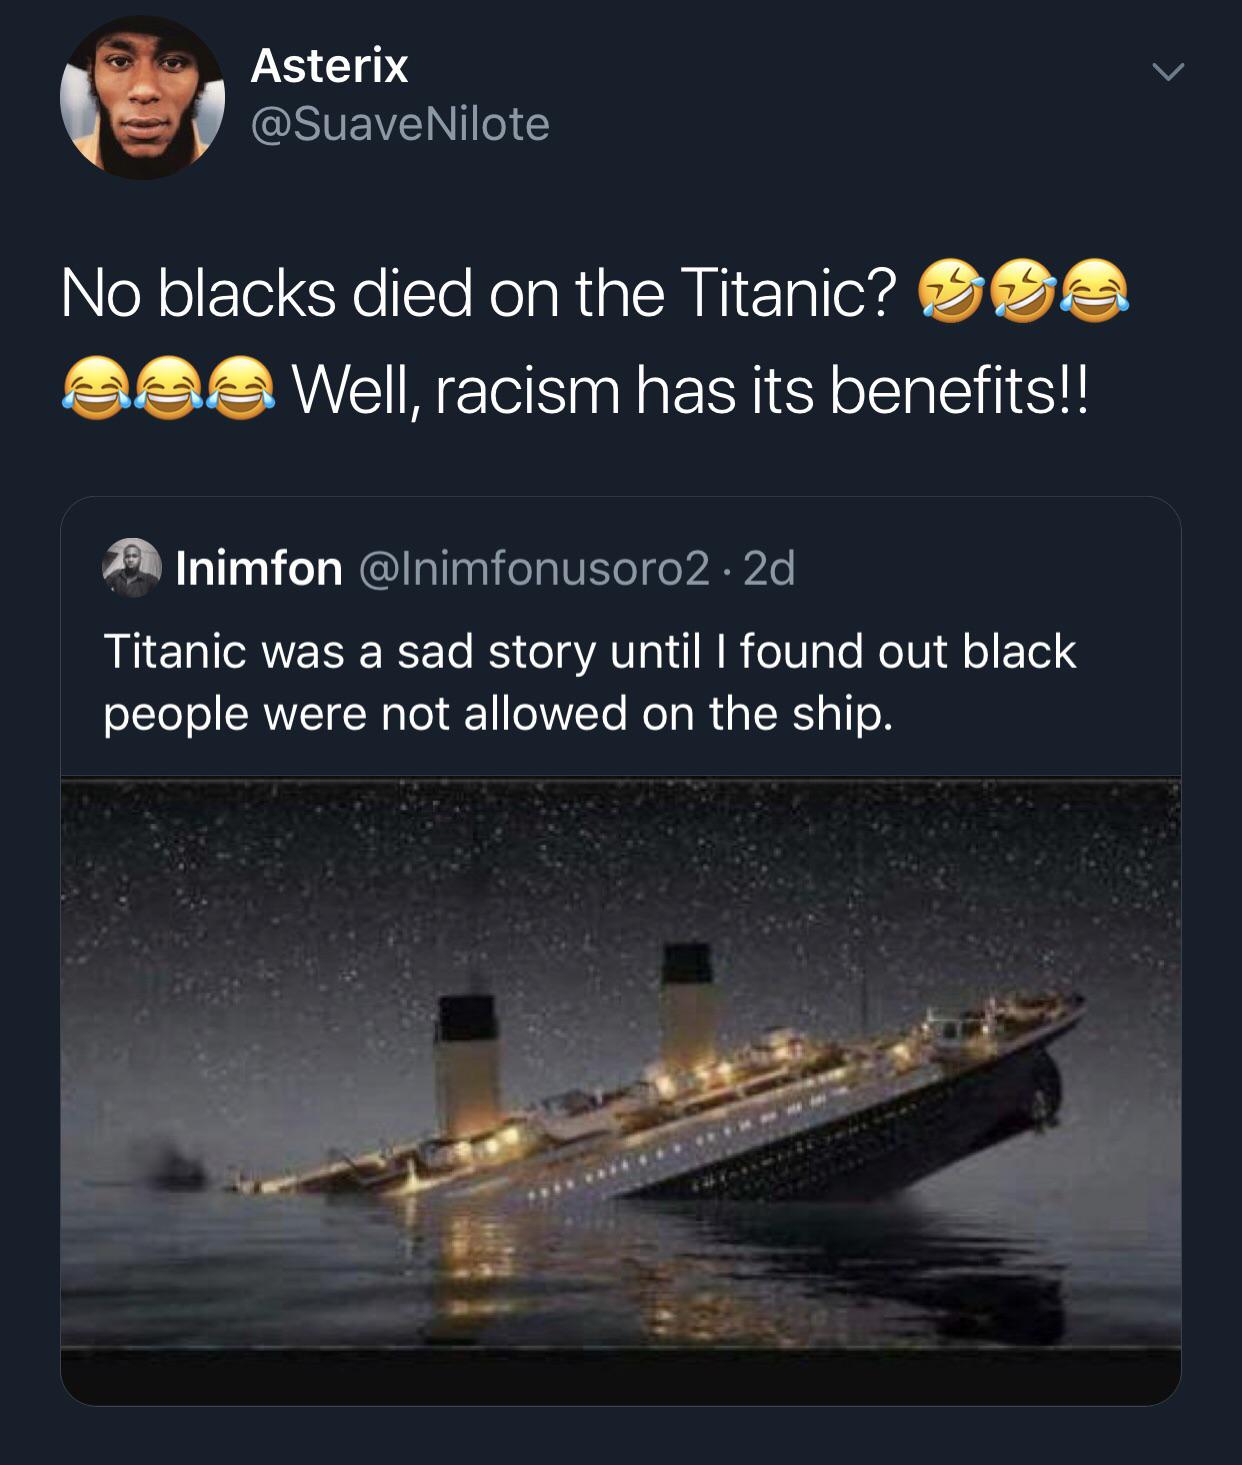 black twitter - No blacks died on the Titanic?  racism has its benefits!! Titanic was a sad story until I found out black people were not allowed on the ship.